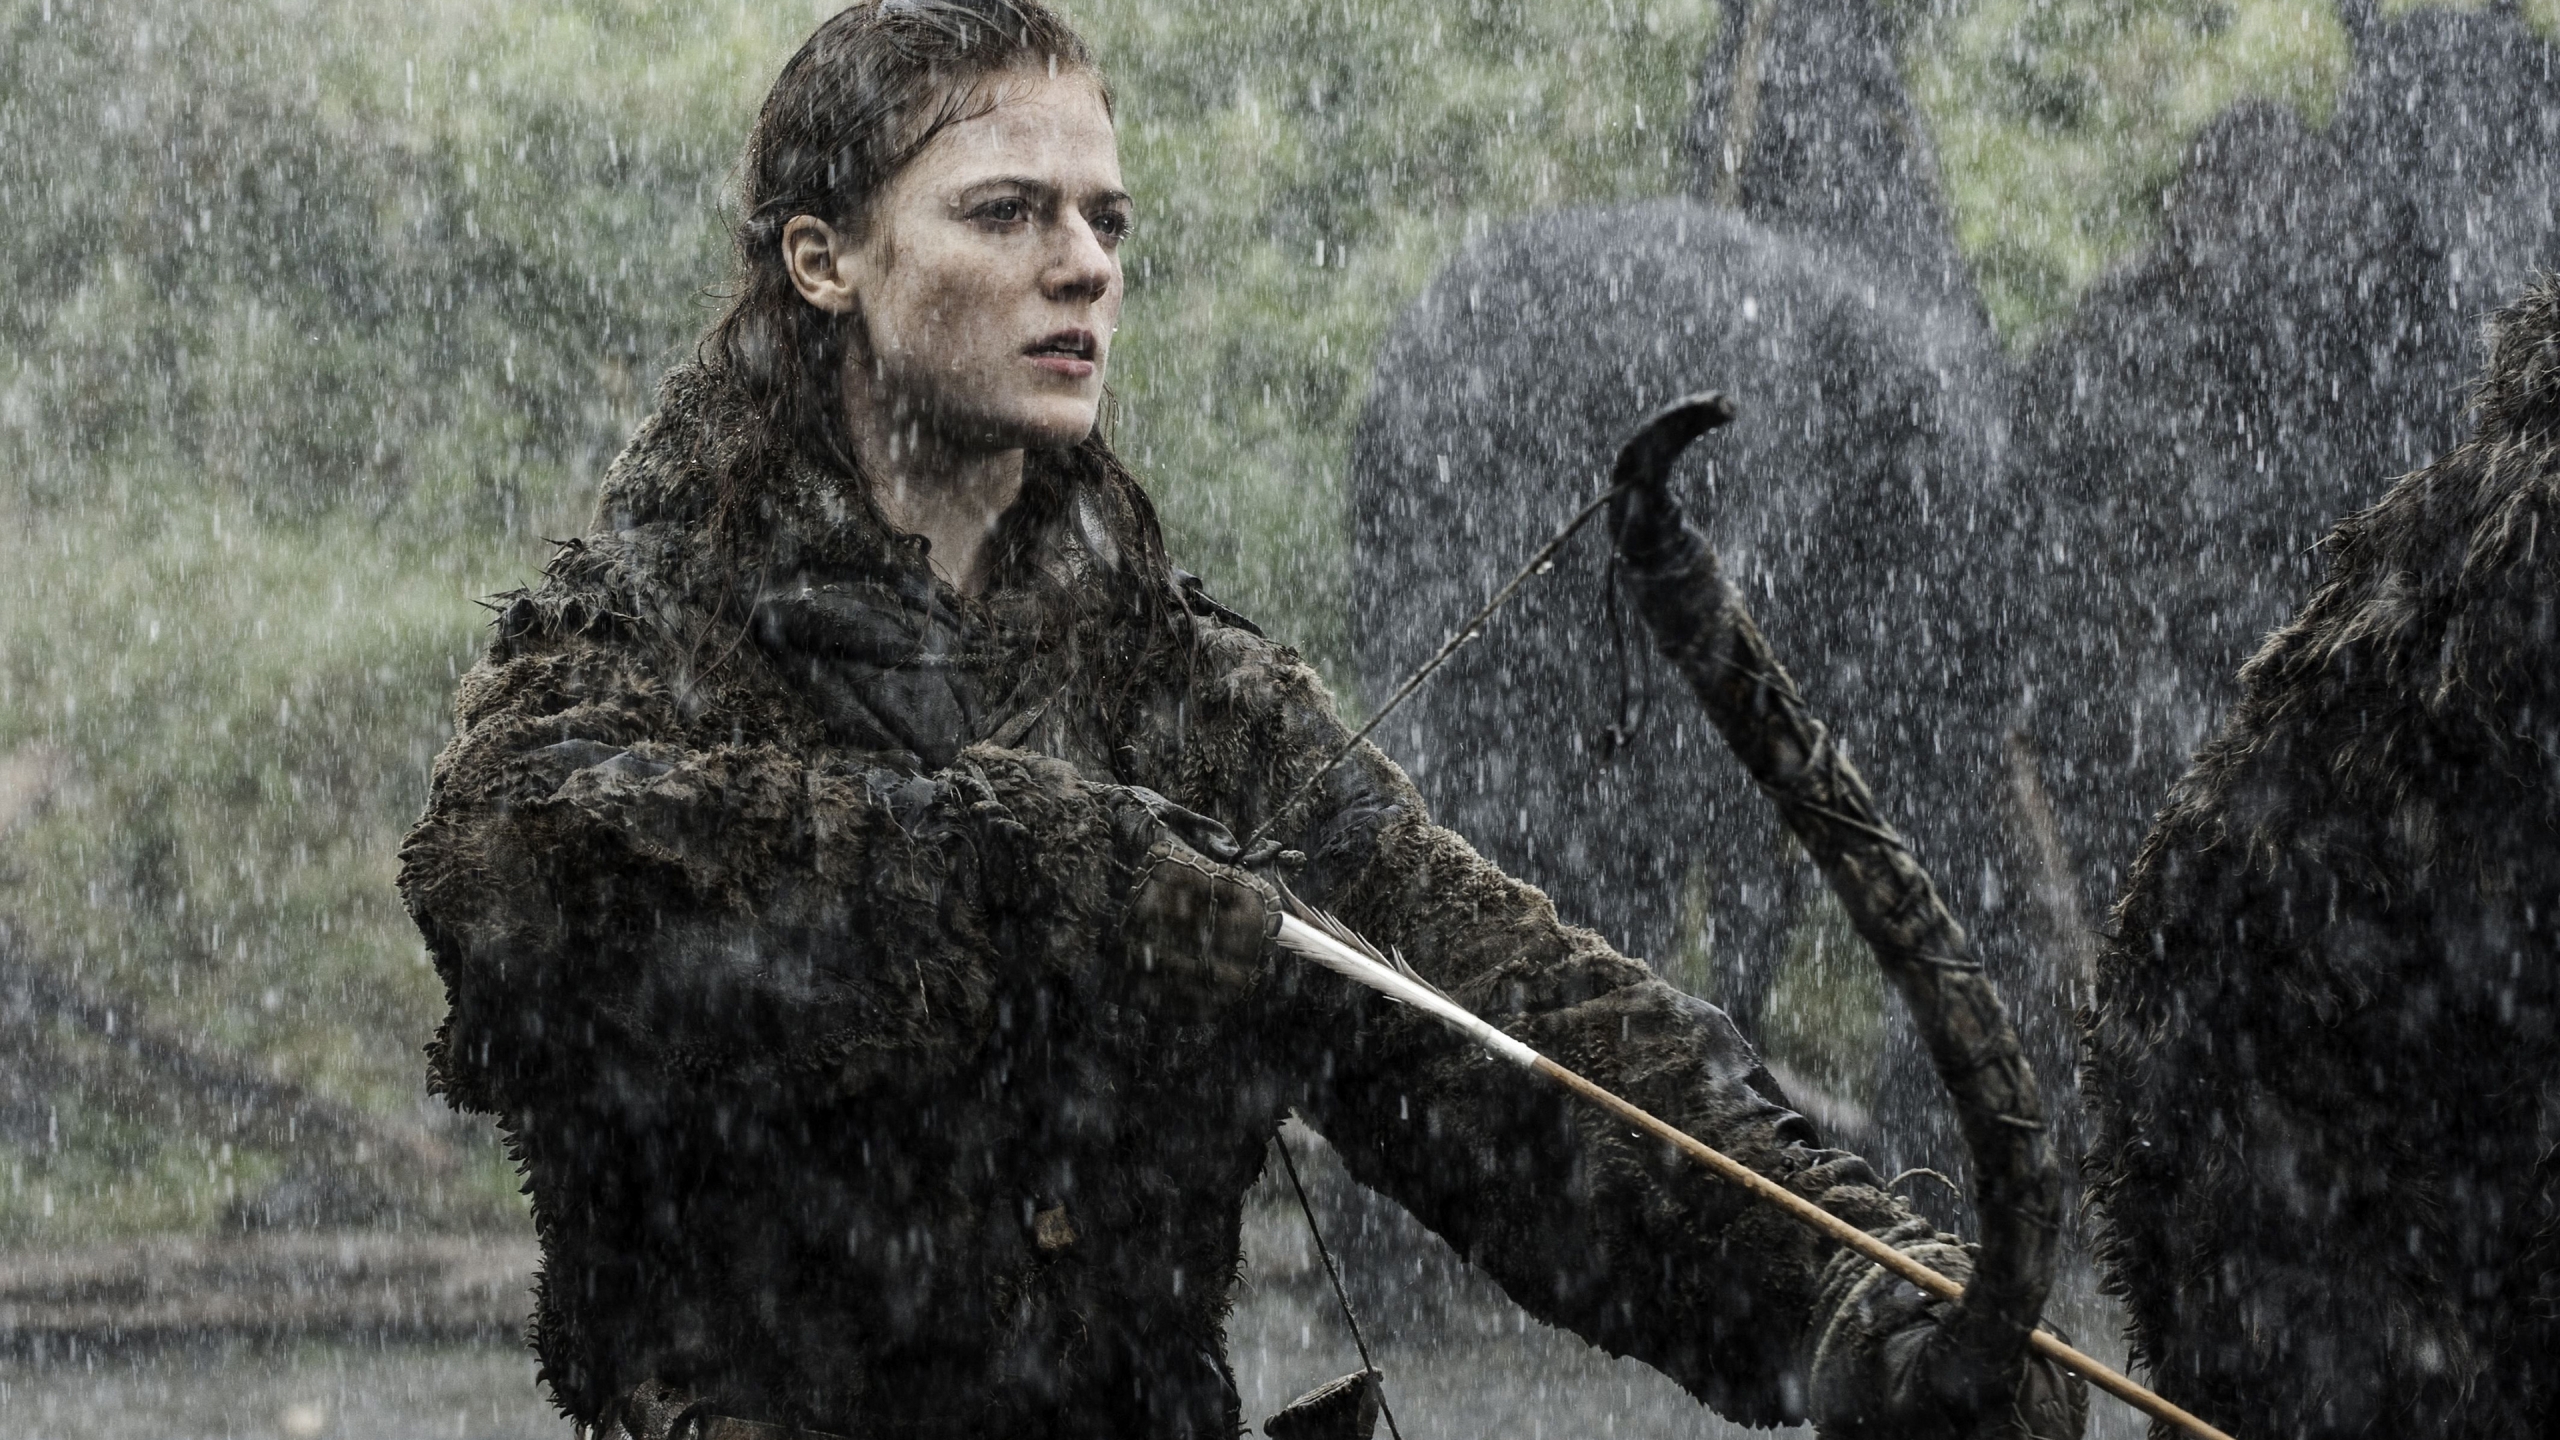 Ygritte from Game of Thrones for 2560x1440 HDTV resolution